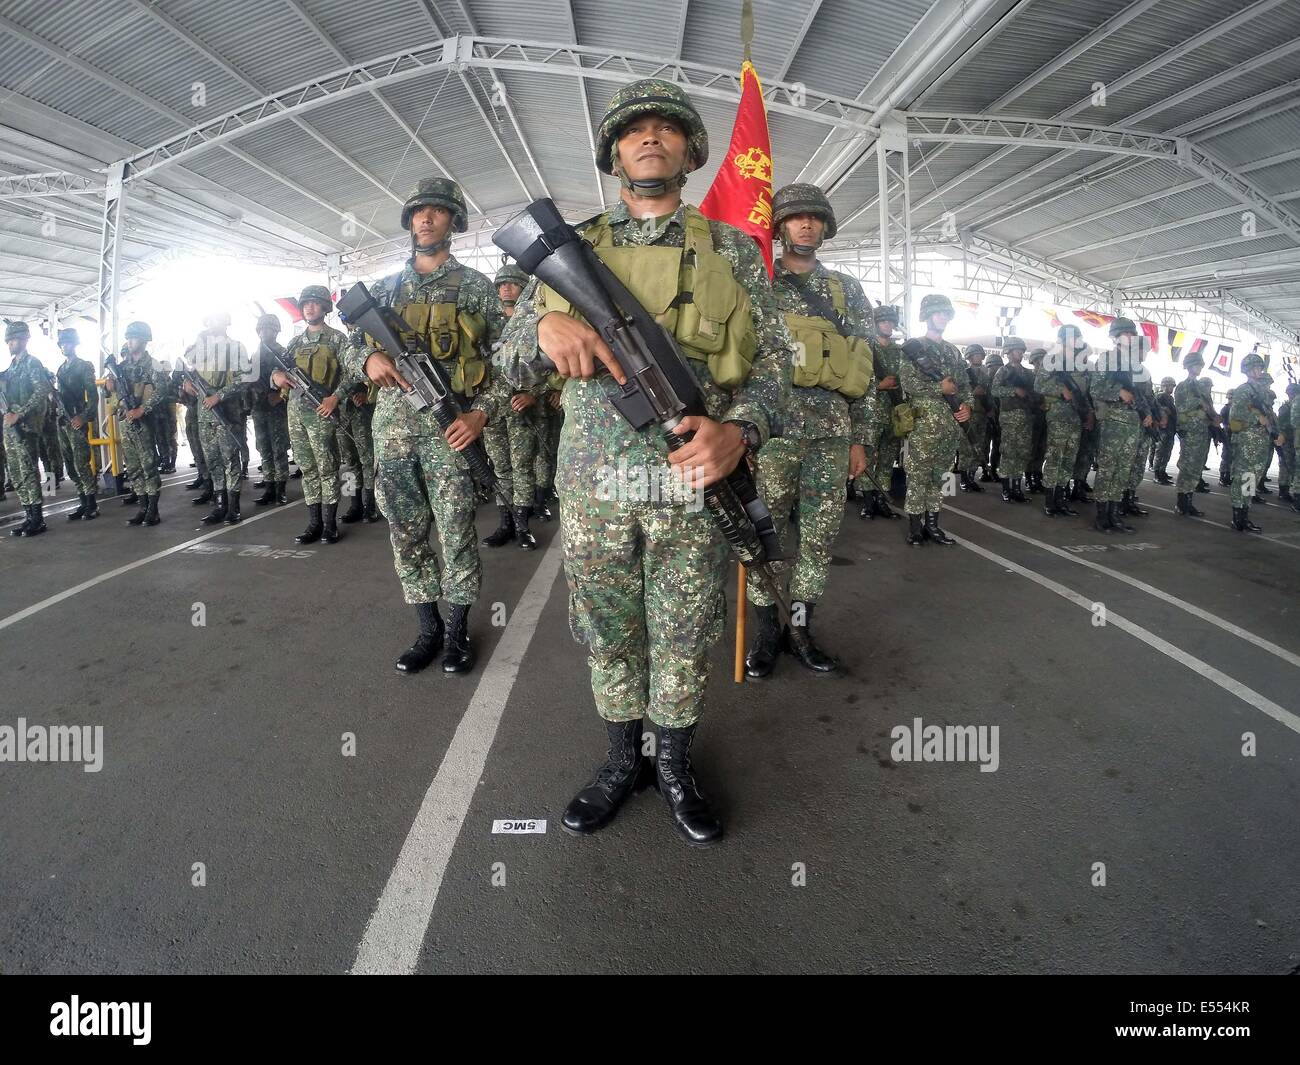 Manila, Philippines. 21st July, 2014. Members of the Marine Battalion Landing Team 5 (MBLT5) stand at attention during arrival ceremony inside the Philippine Navy Headquarters in Manila, the Philippines, July 21, 2014. More than 200 members of the MBLT5 arrived in Manila after serving almost 10 years in Northern Philippines. Credit:  Rouelle Umali/Xinhua/Alamy Live News Stock Photo